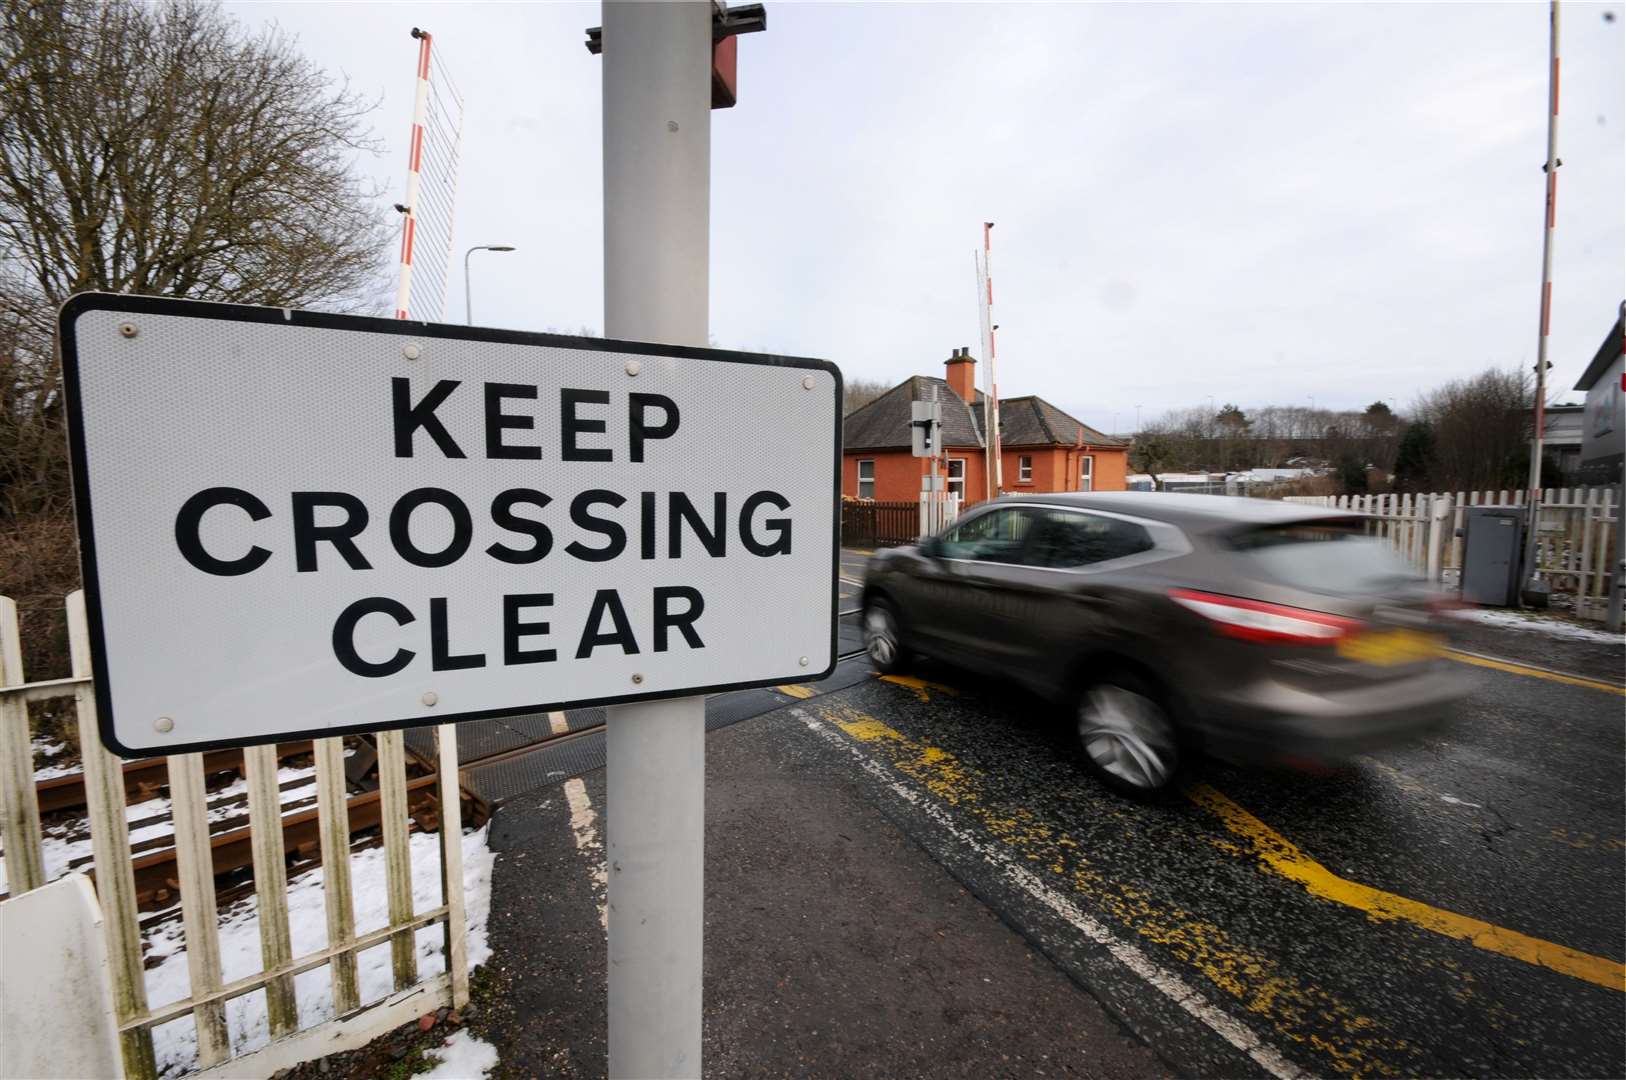 Cllr Macpherson believes changes to Academy Street could impact on other areas including around the Harbour Road level crossing where traffic often backs up.